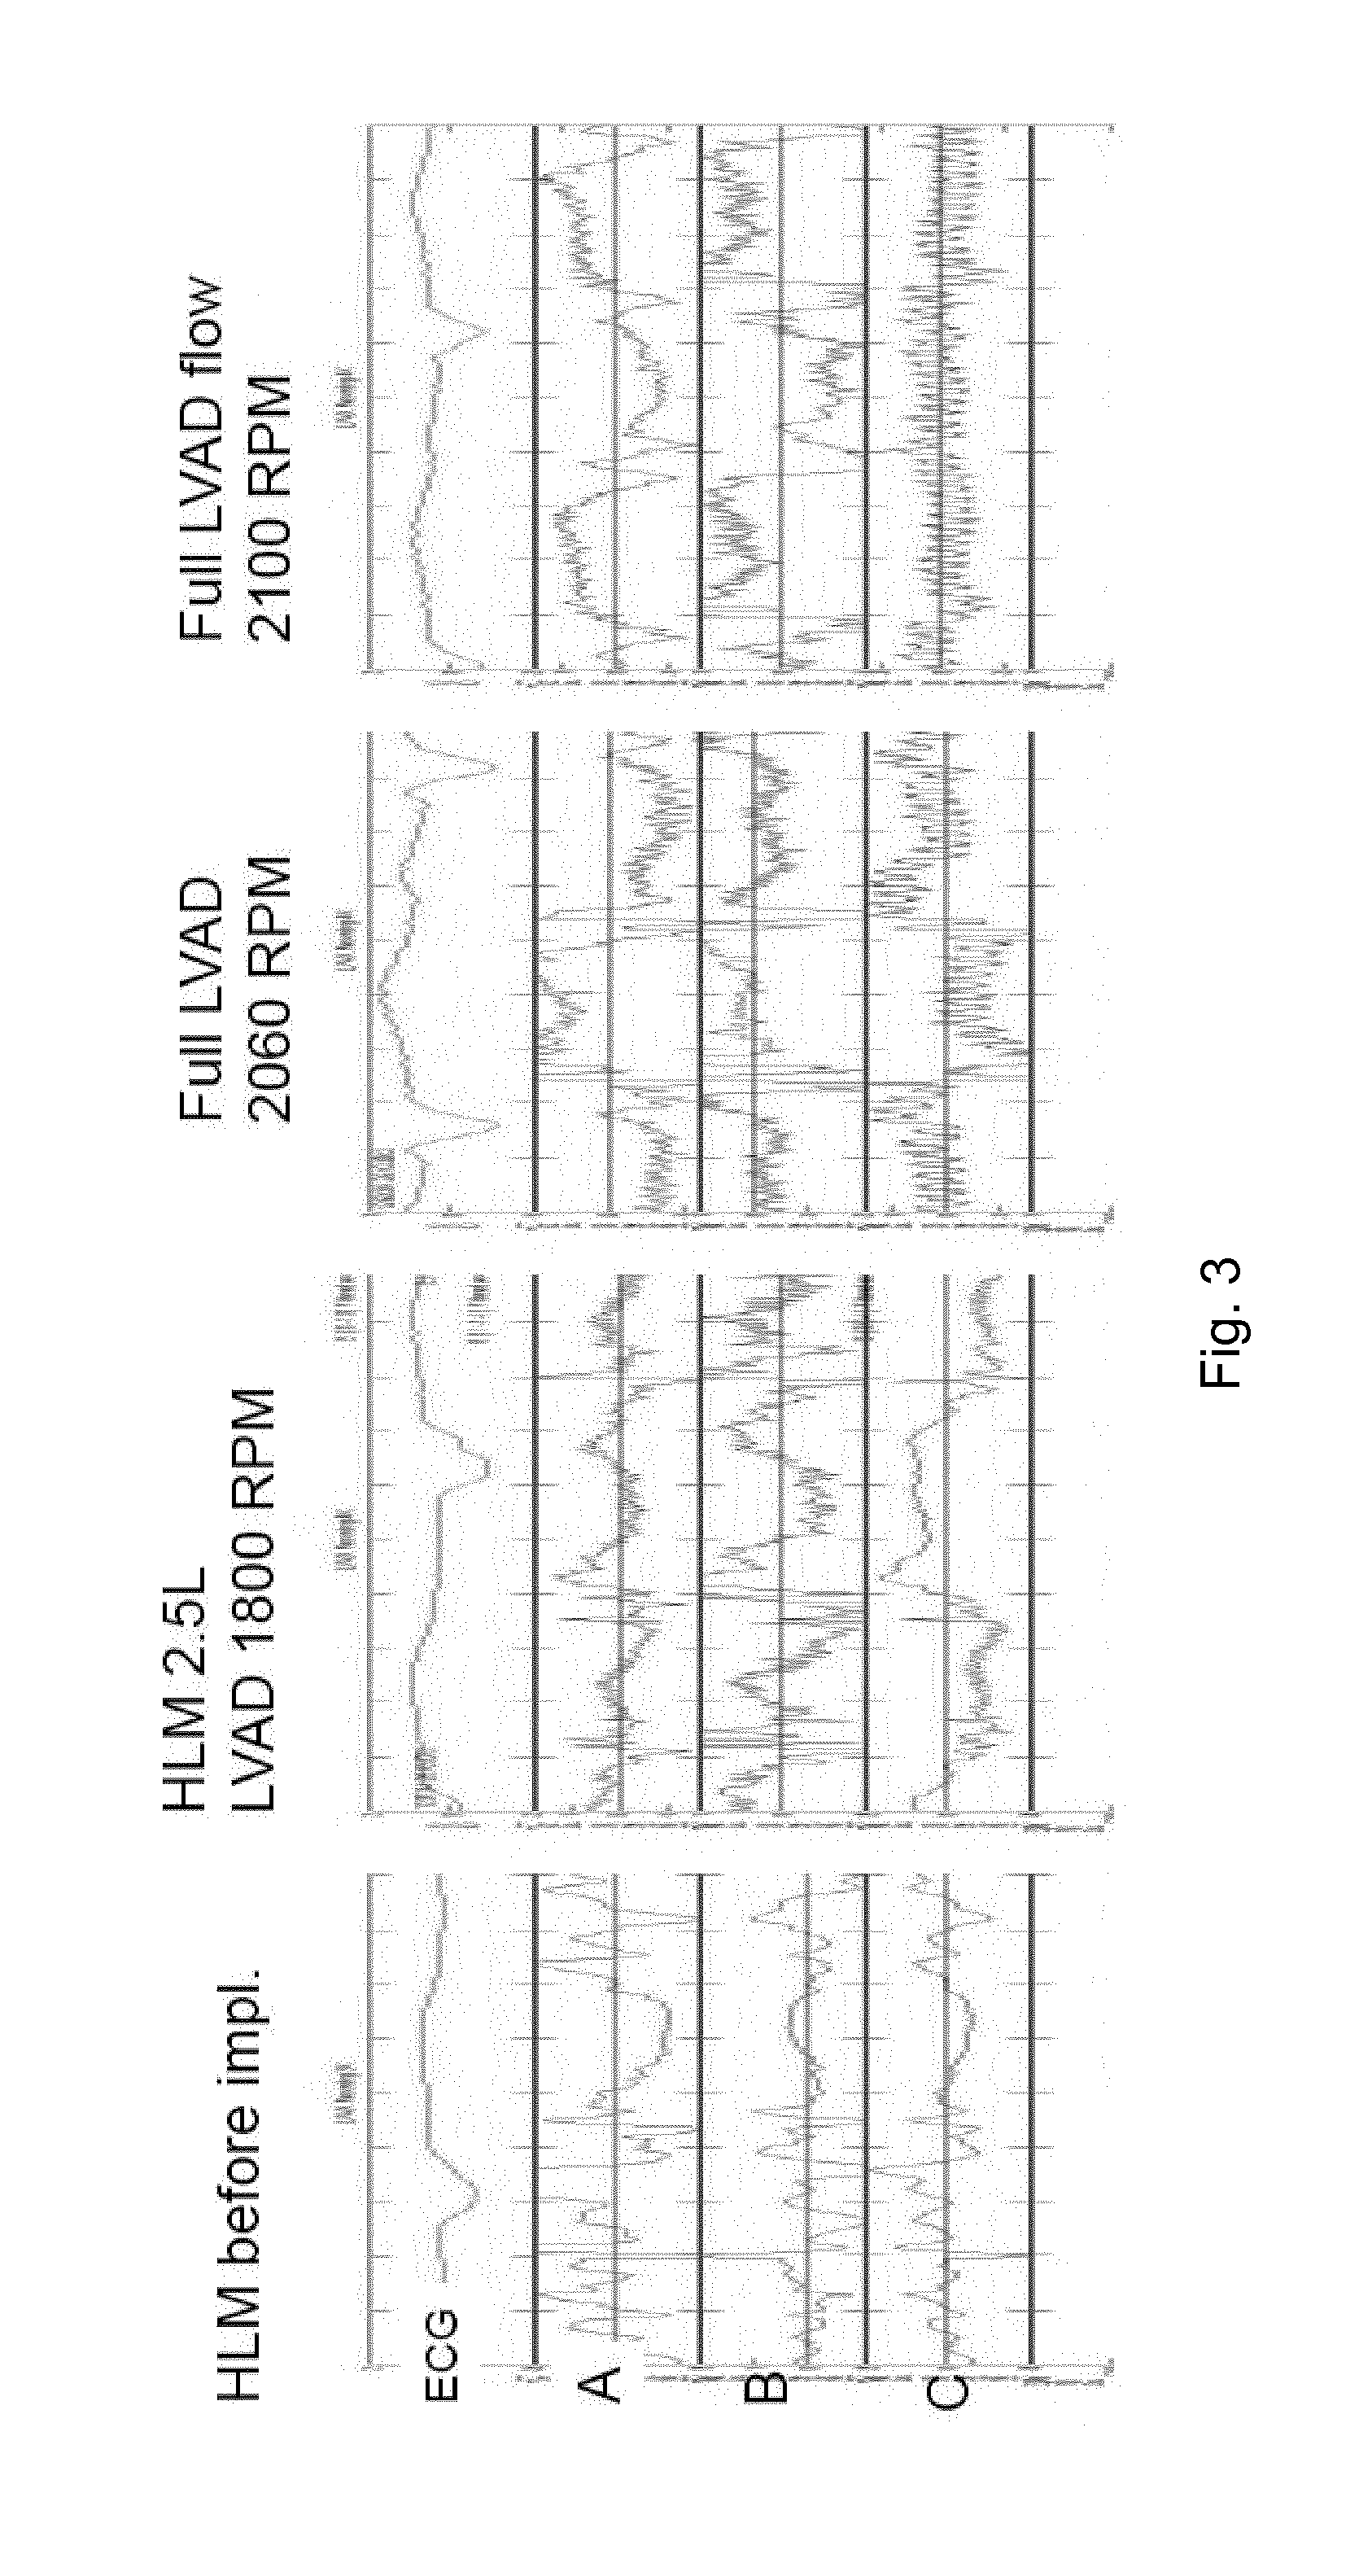 Monitoring of a cardiac assist device